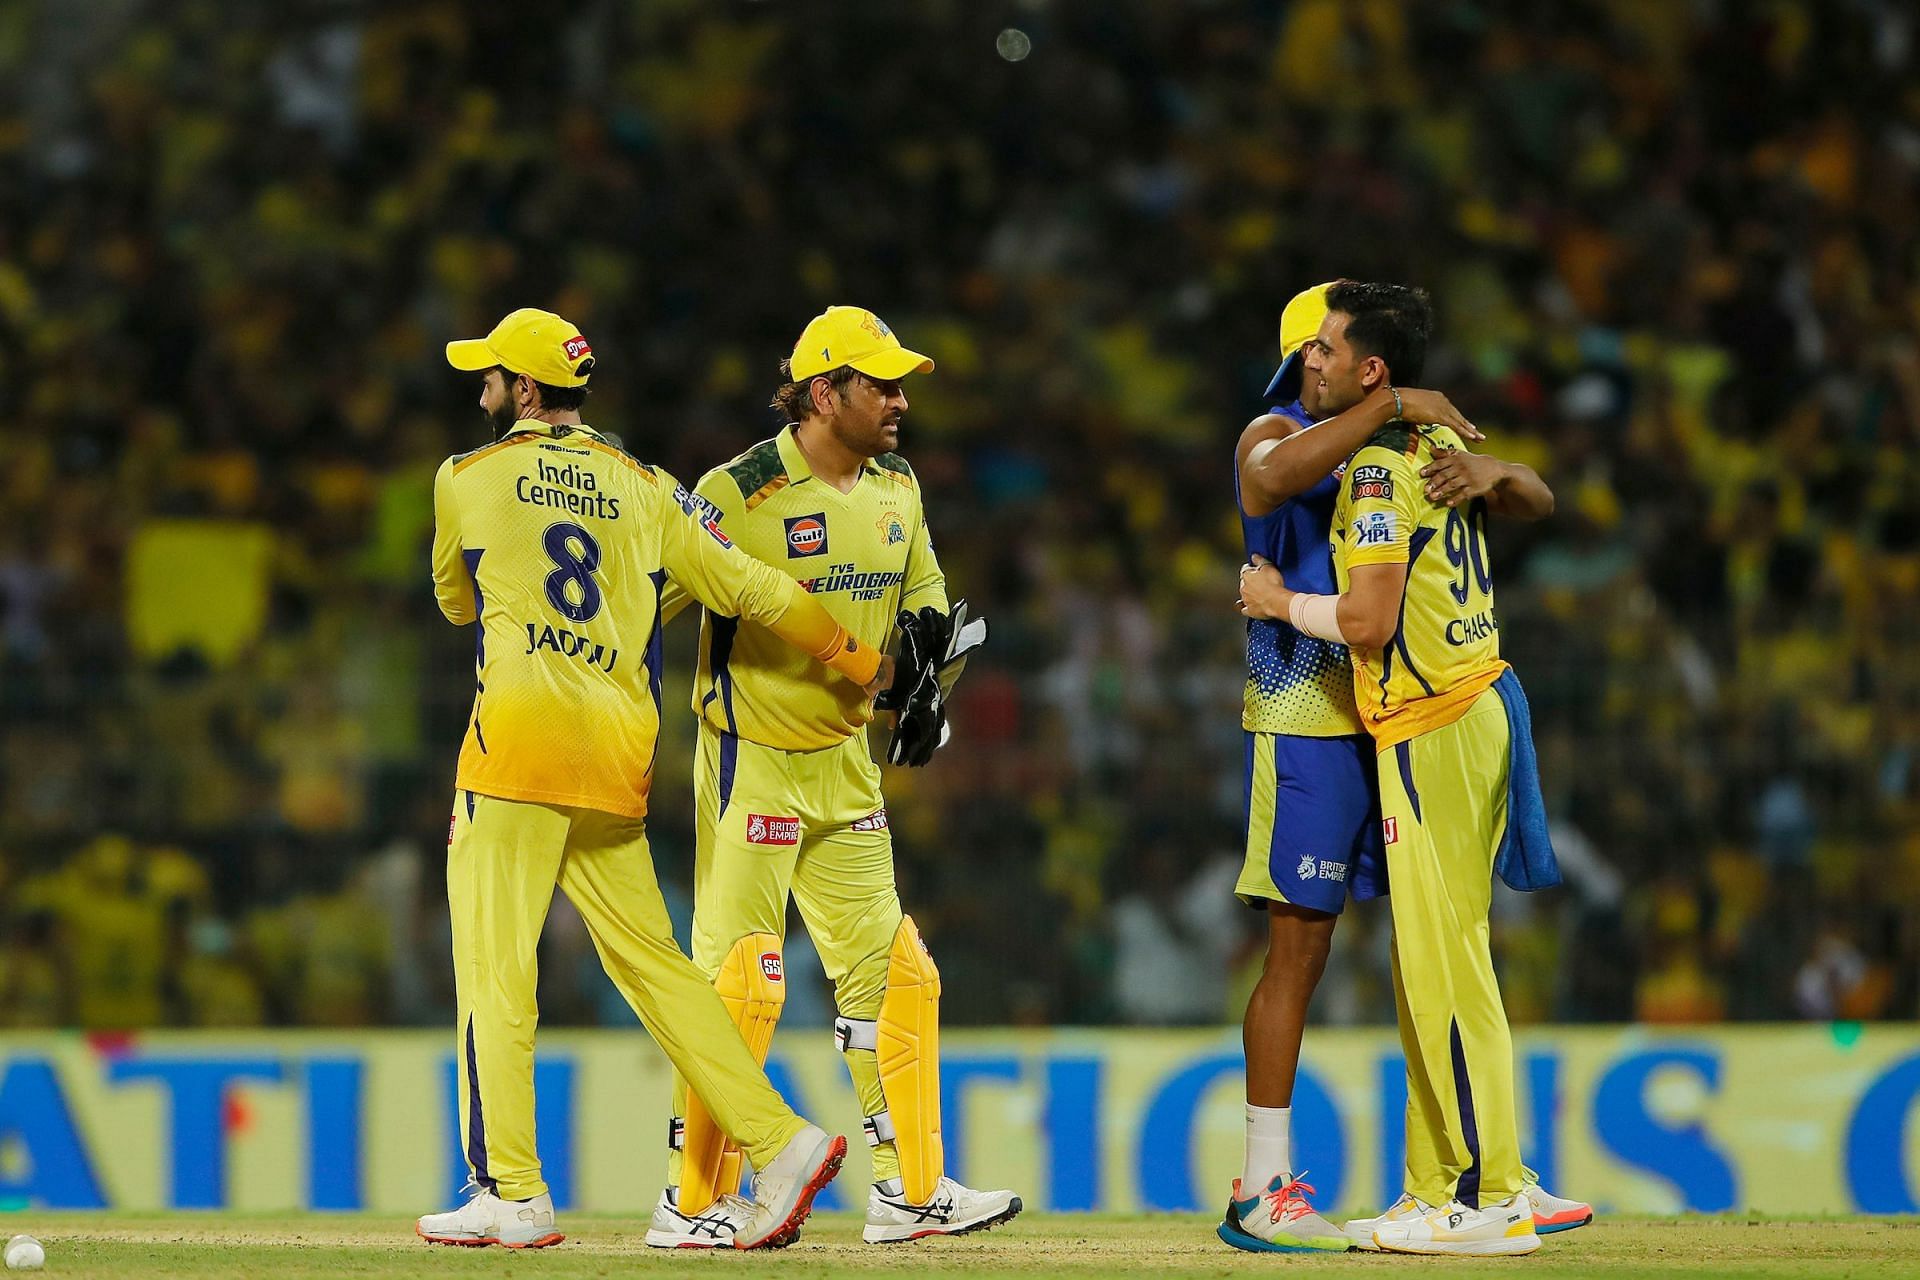 CSK overcame difficulties in both these seasons [Image: IPL Twitter]